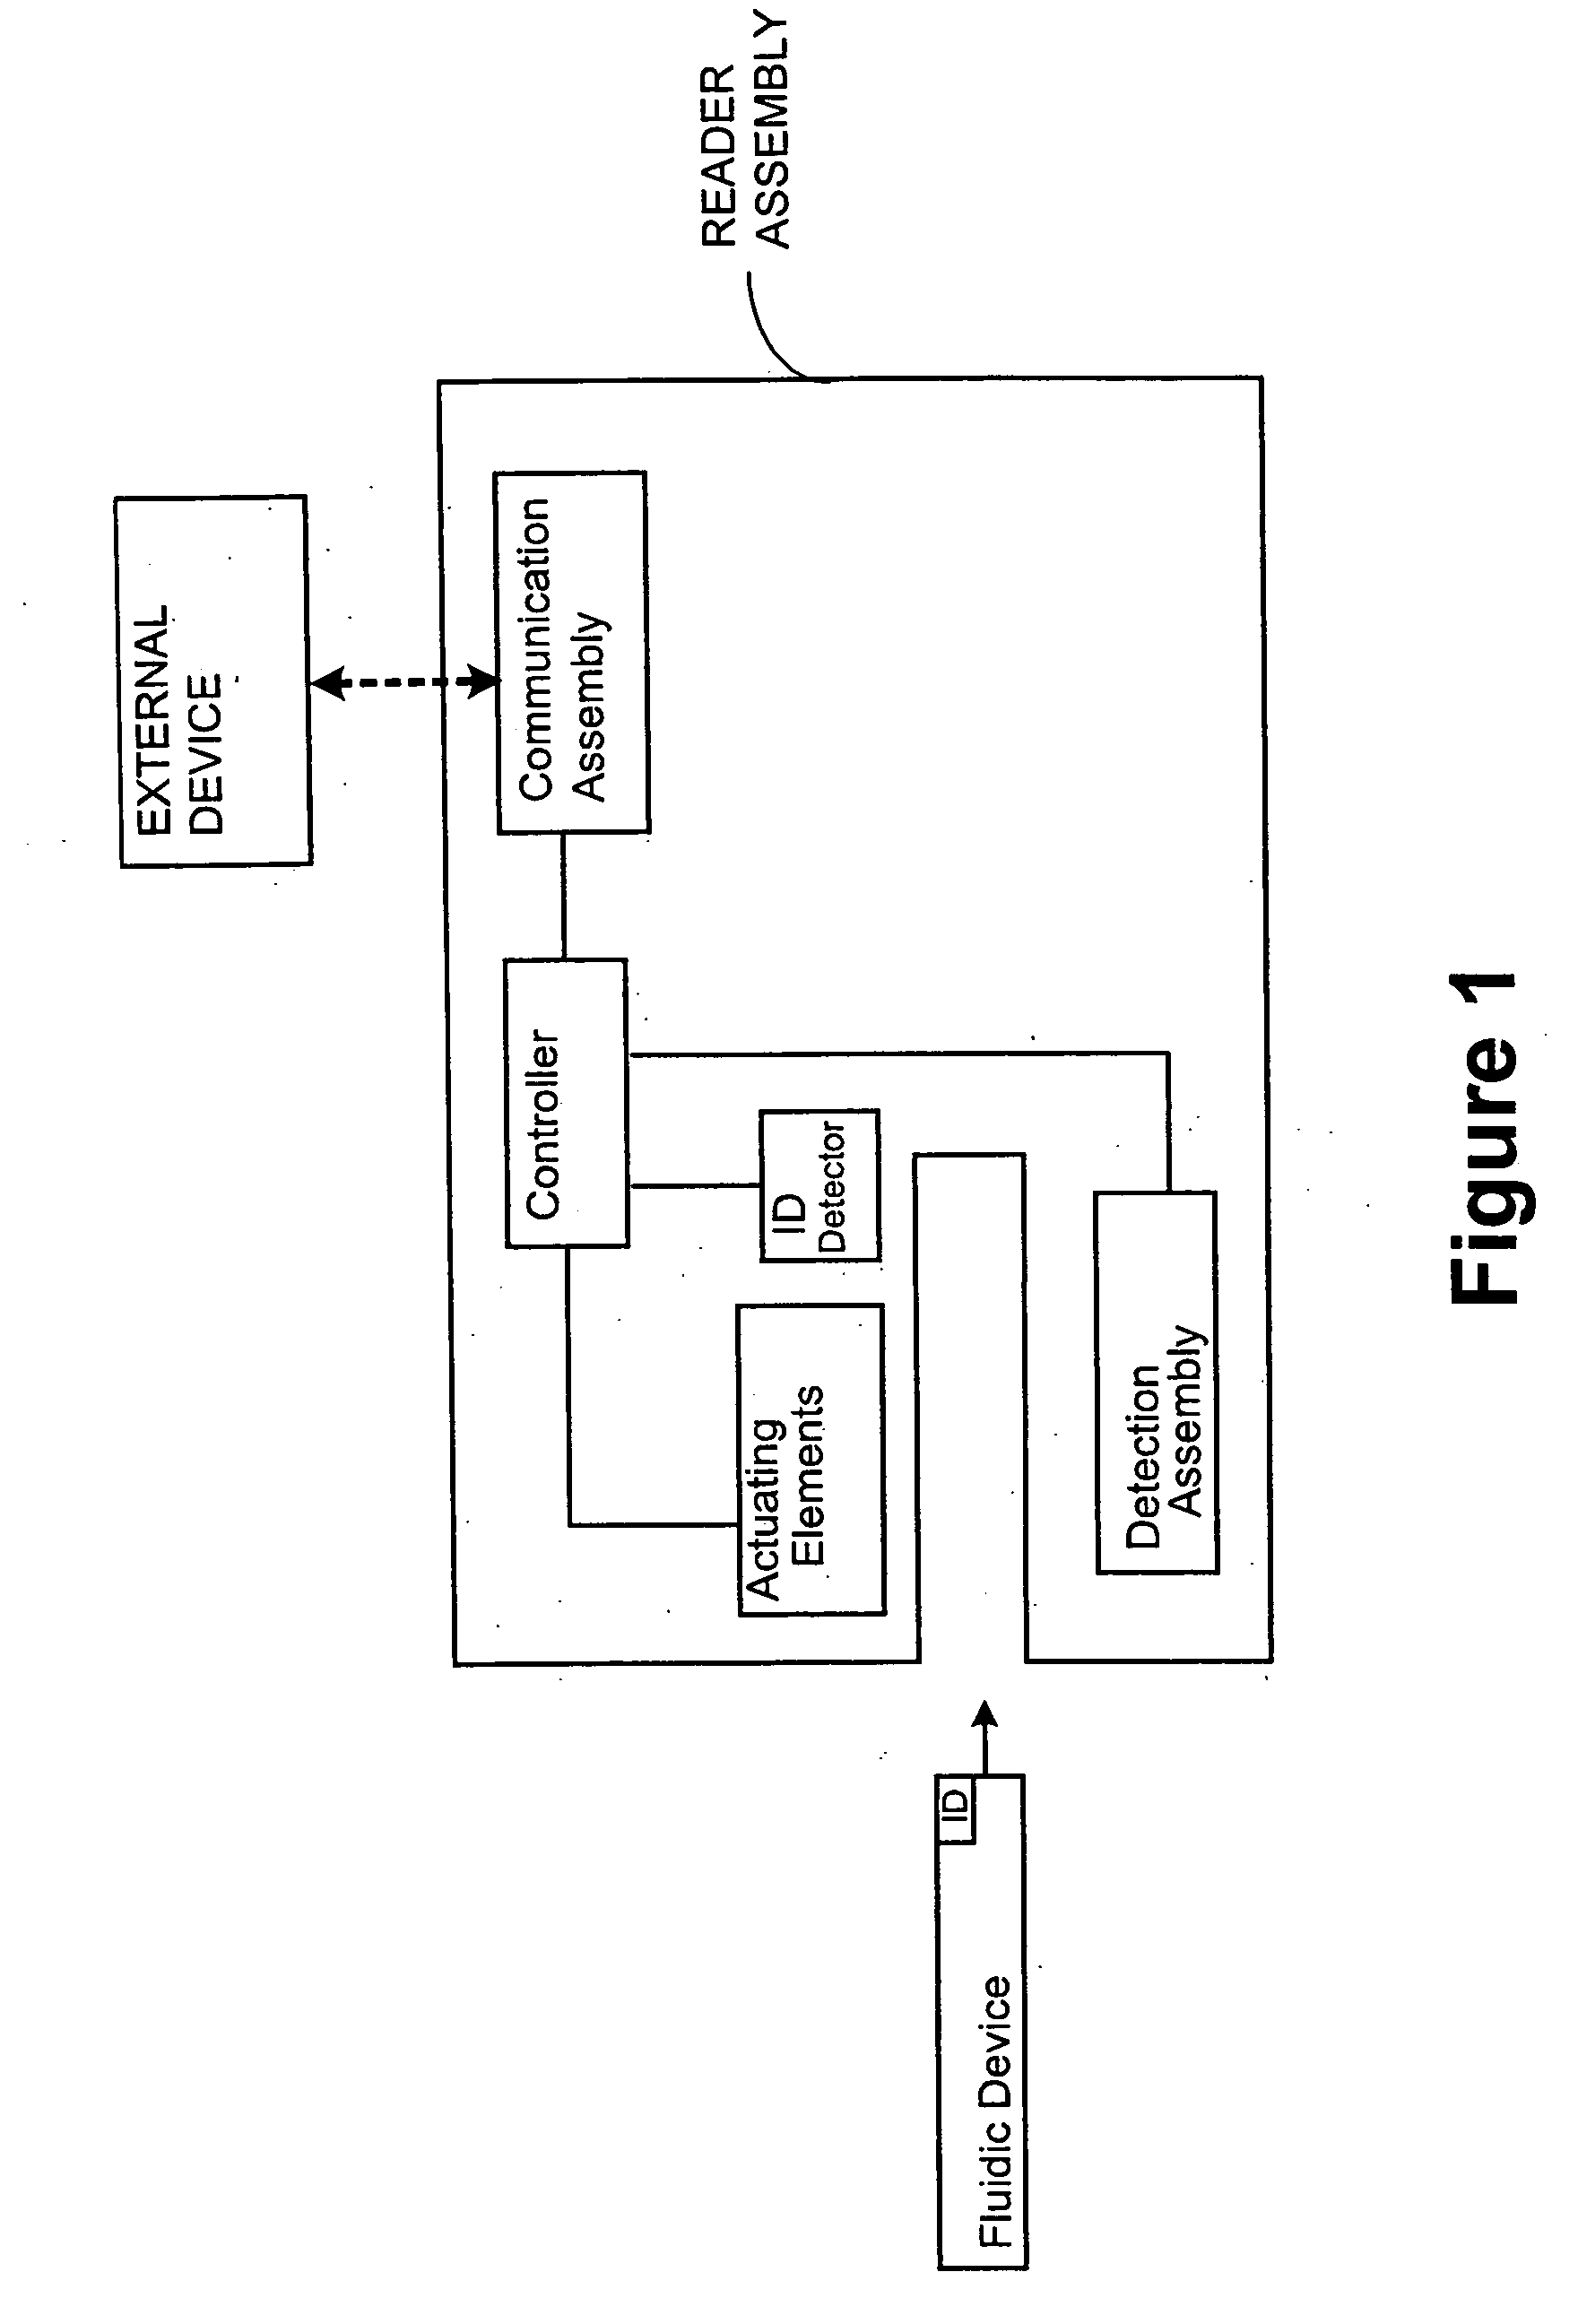 Fluidic medical devices and uses thereof